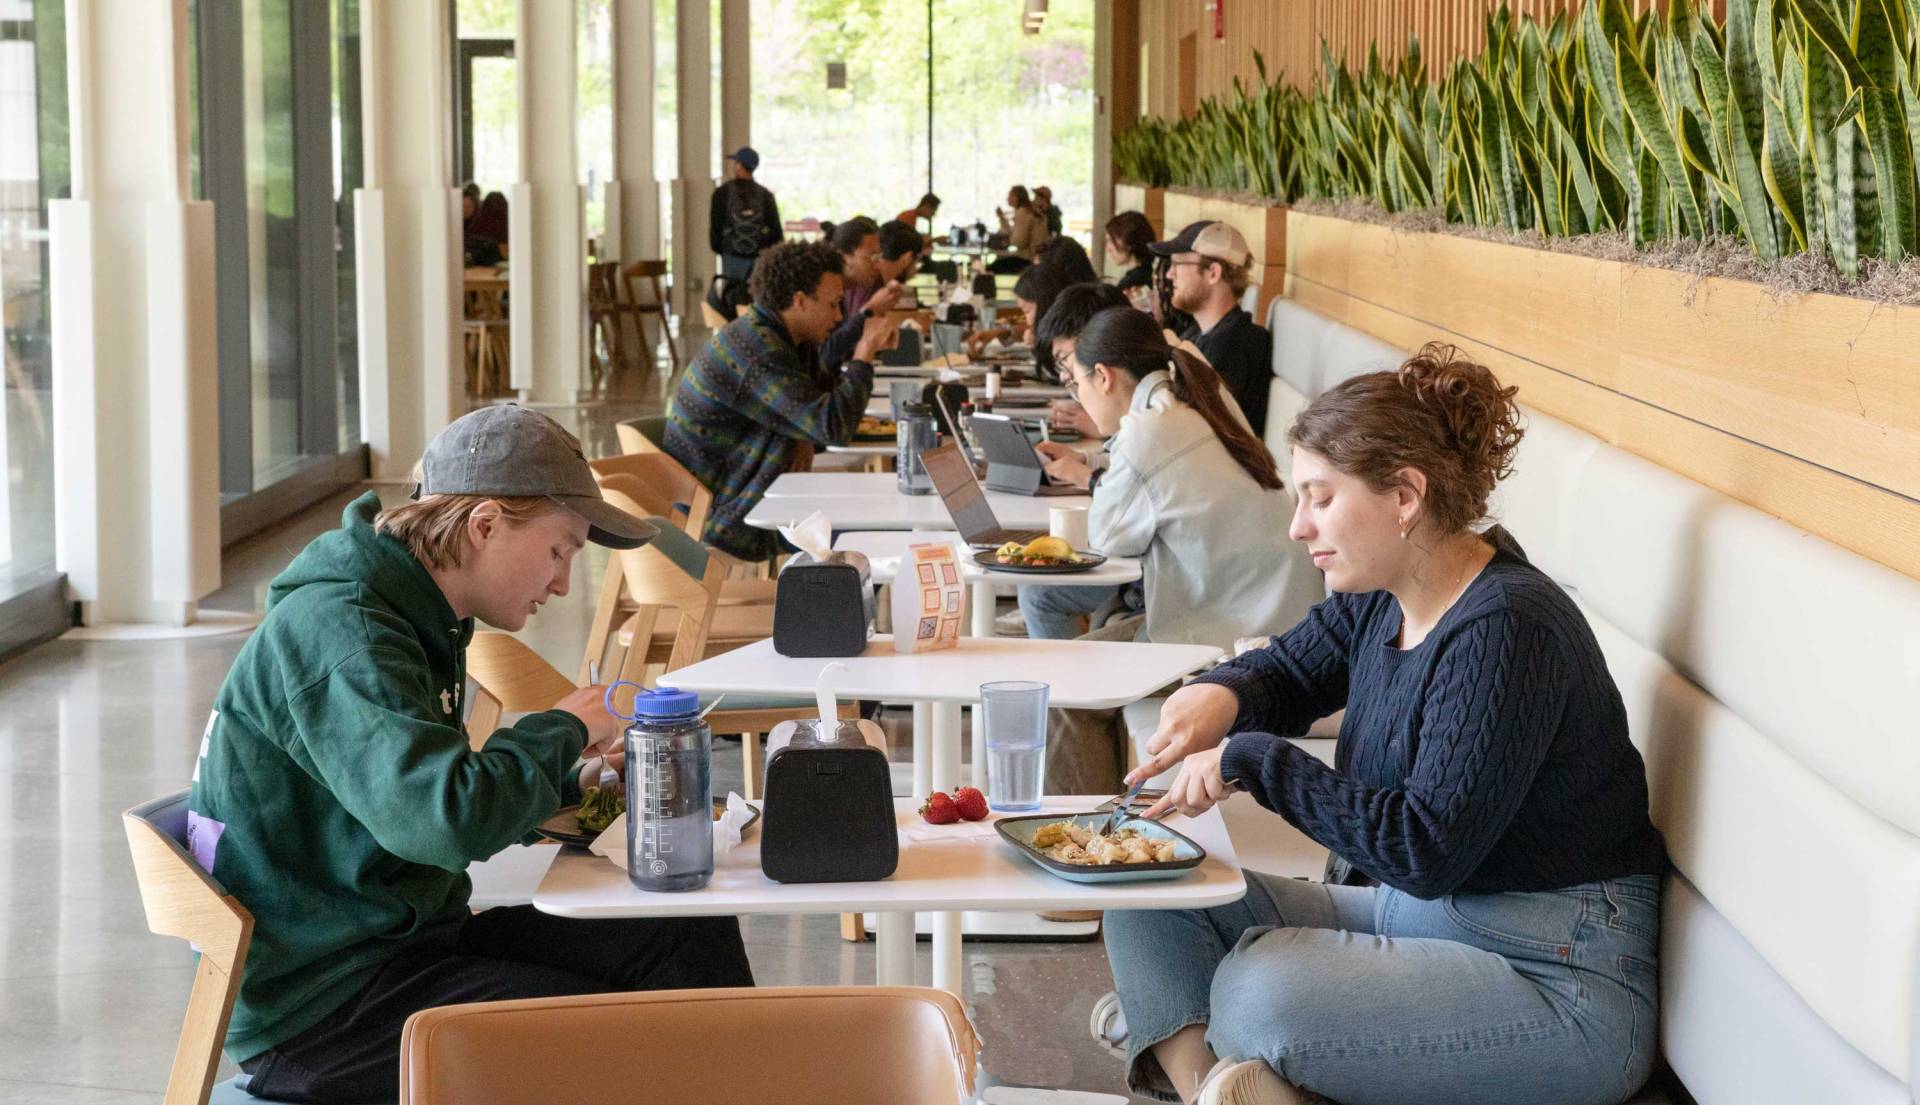 Students eating a meal in the dining hall